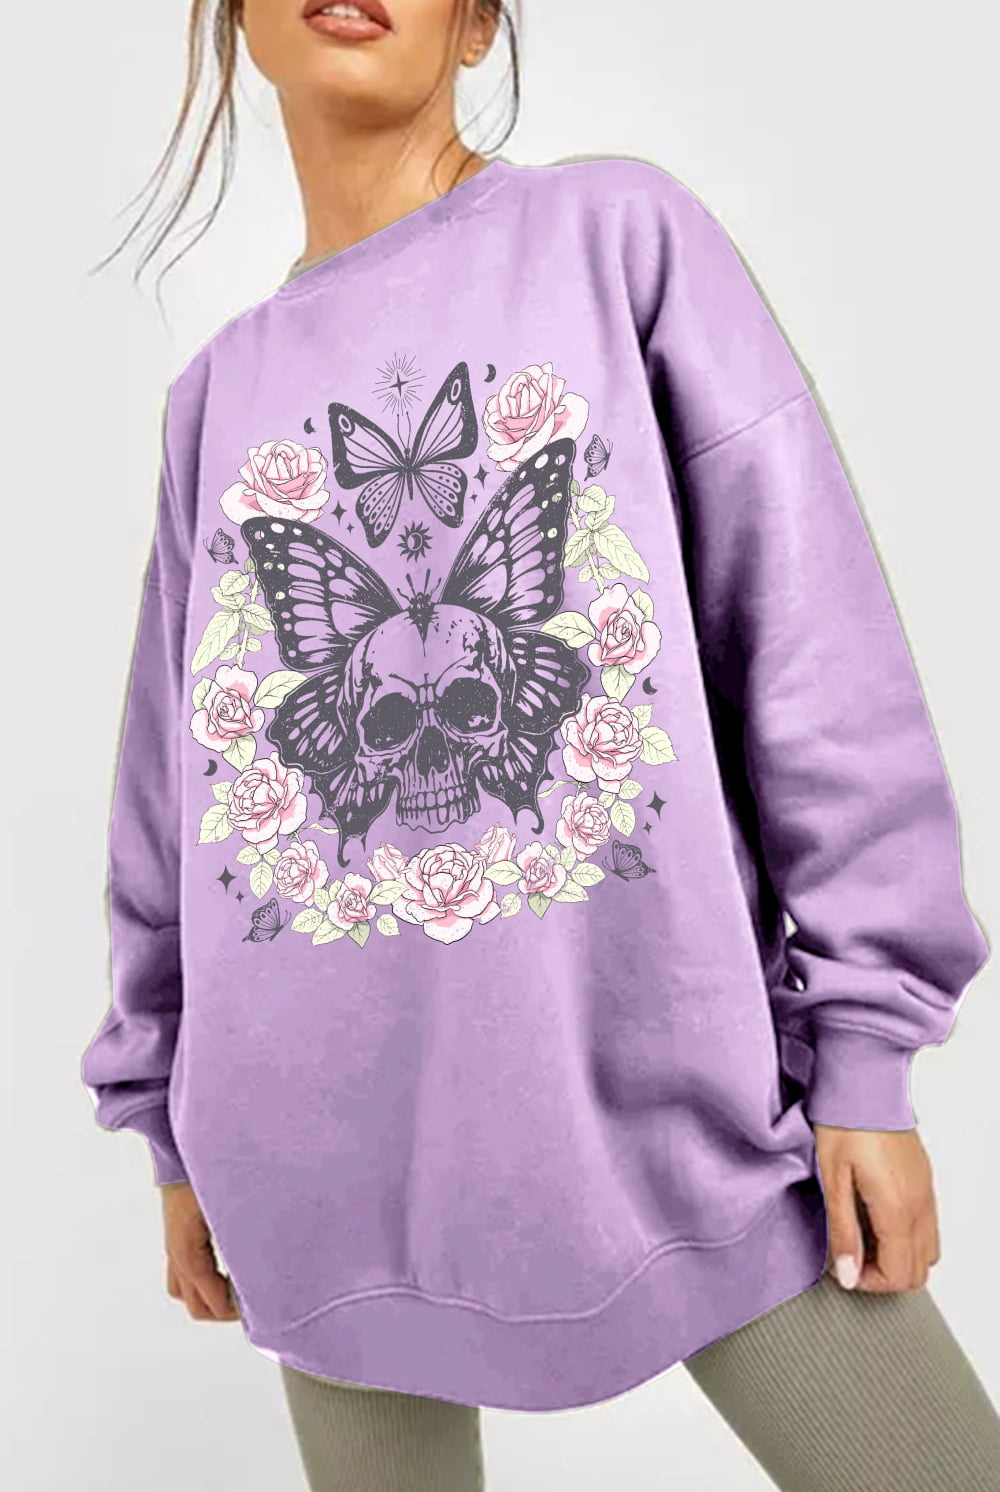 Thistle Simply Love Simply Love Full Size Skull Butterfly Graphic Sweatshirt Sweatshirts